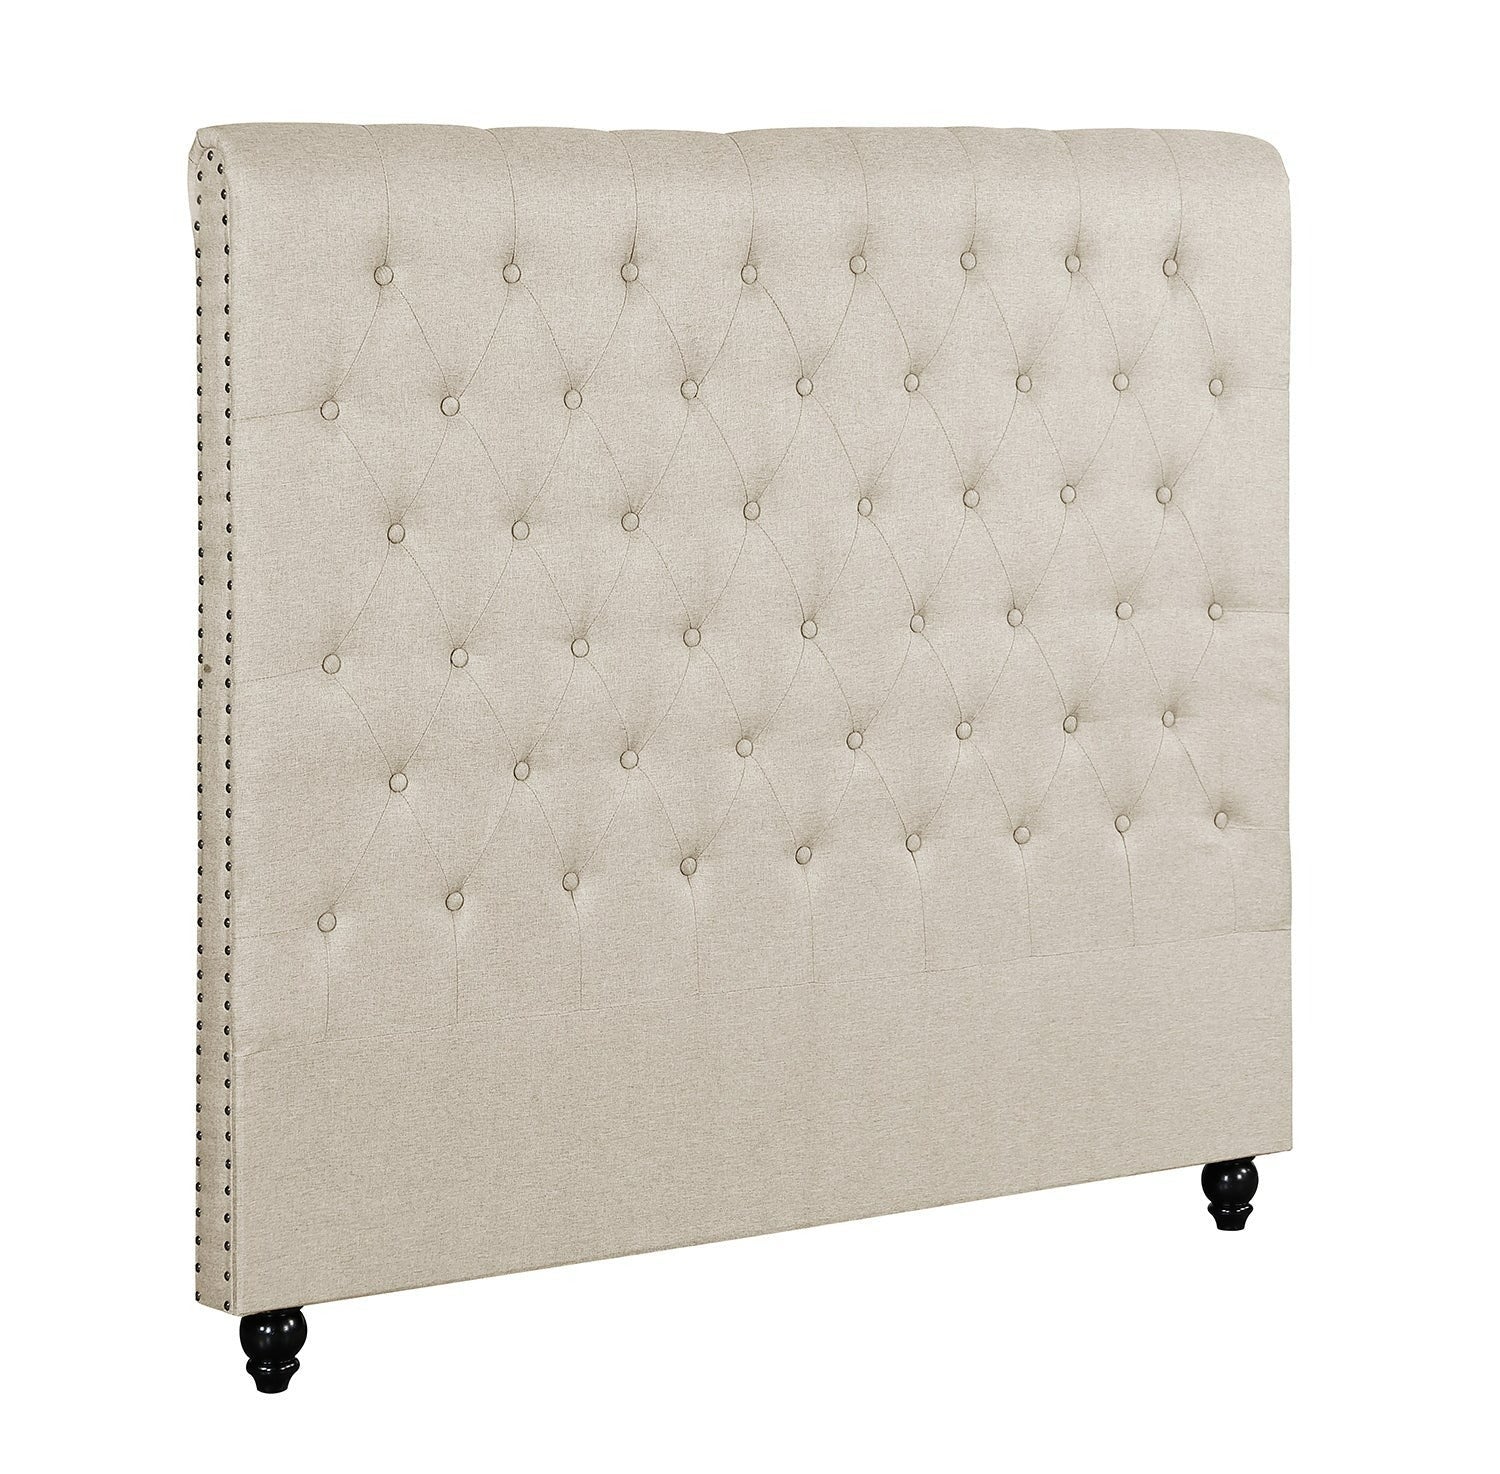 Foret Bed Head King Size Upholstered Headboard cream Bedhead Frame